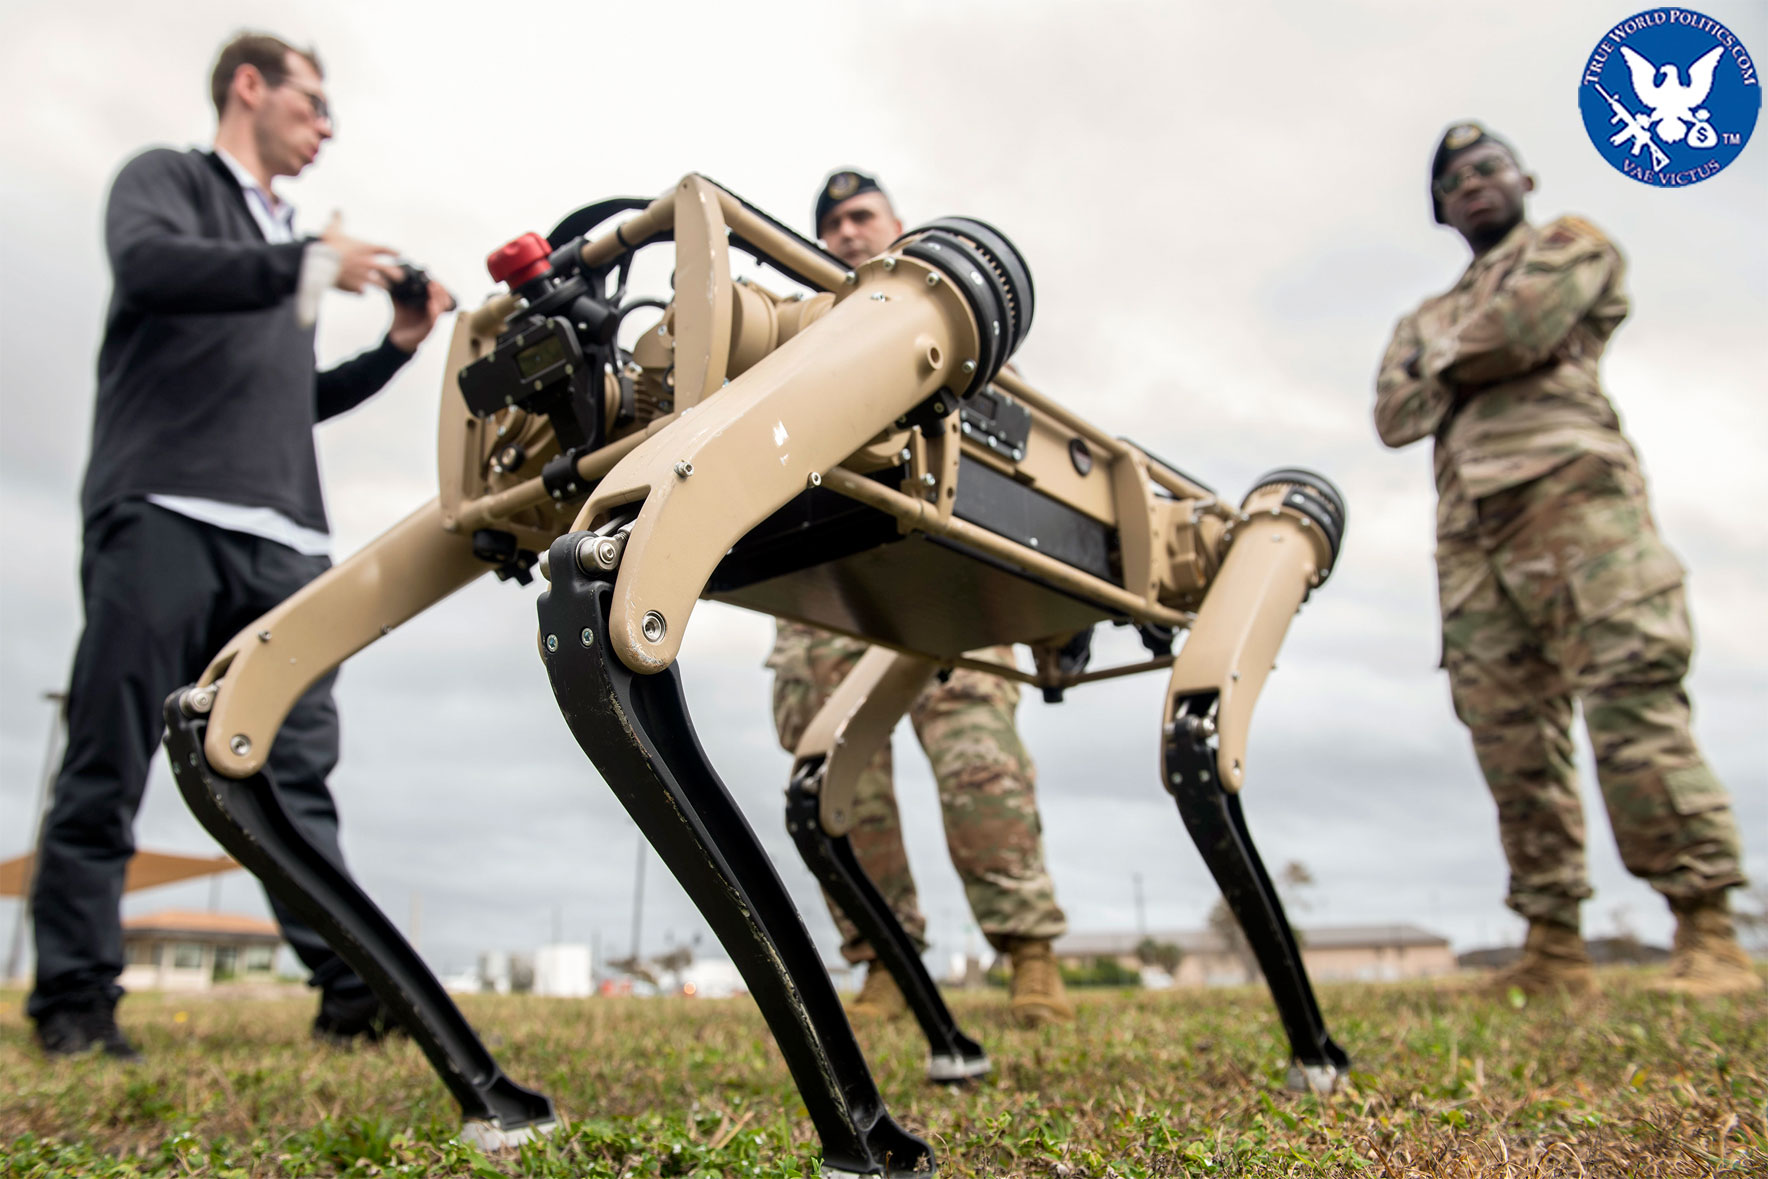 Airmen watch a test of an unmanned ground vehicle at Tyndall Air Force Base, Florida. - Similar to Boston Dynamics 'Spot' robot